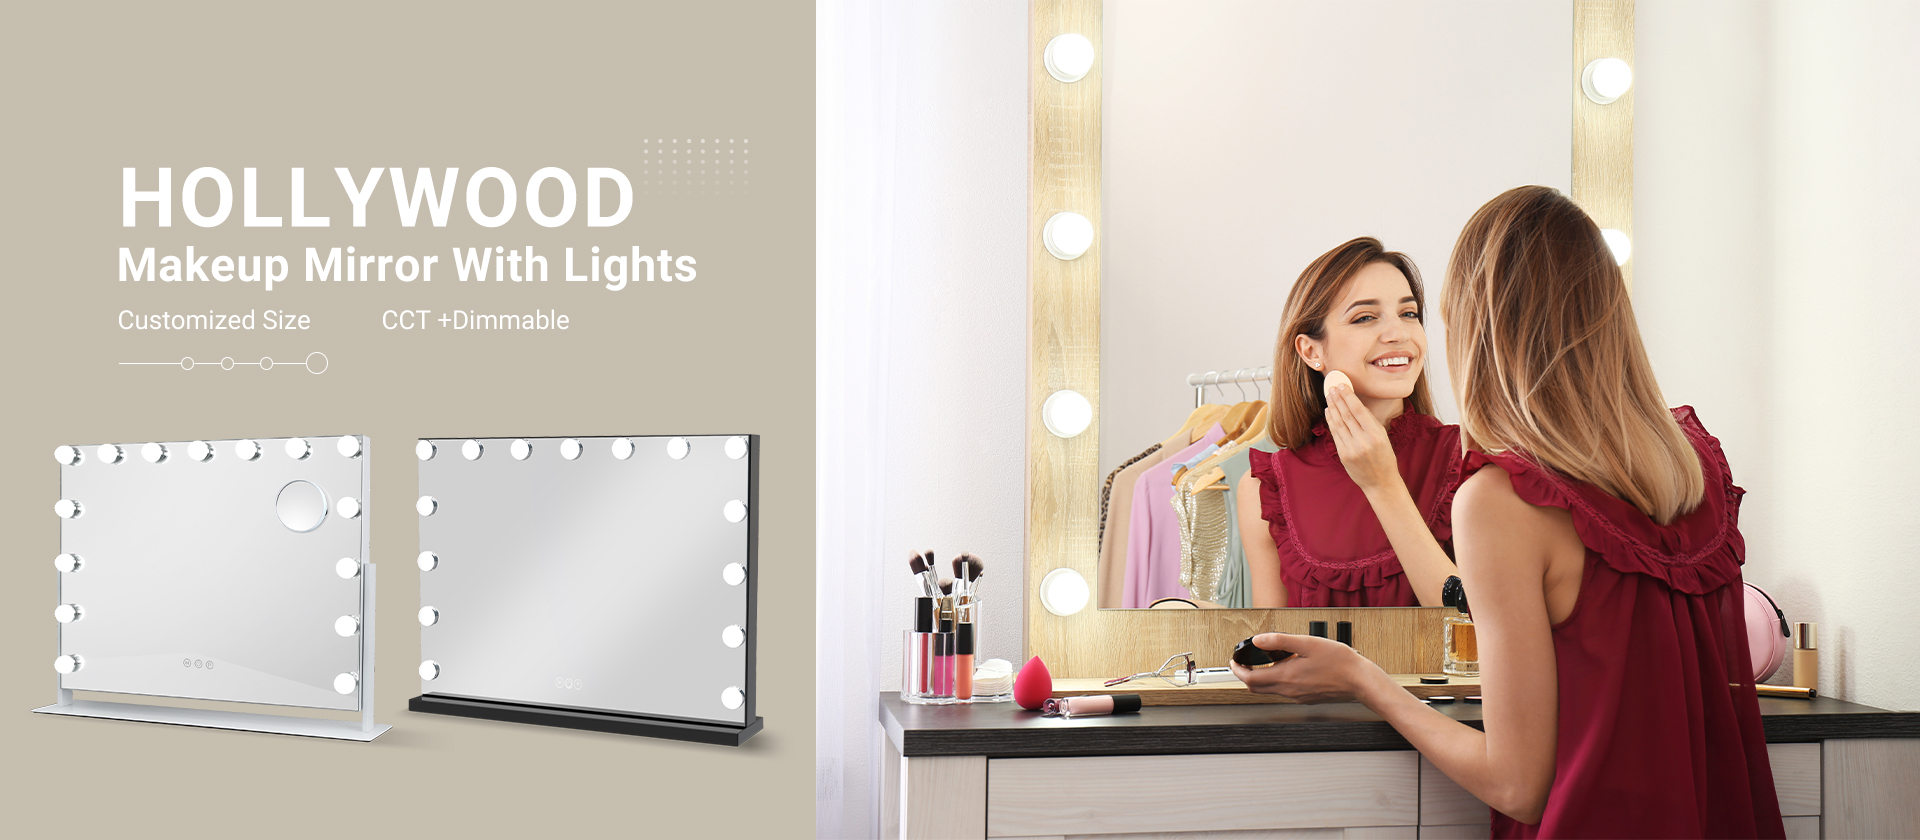 Led Mirror, Led Makeup, Mirror Cabinet - Greenergy